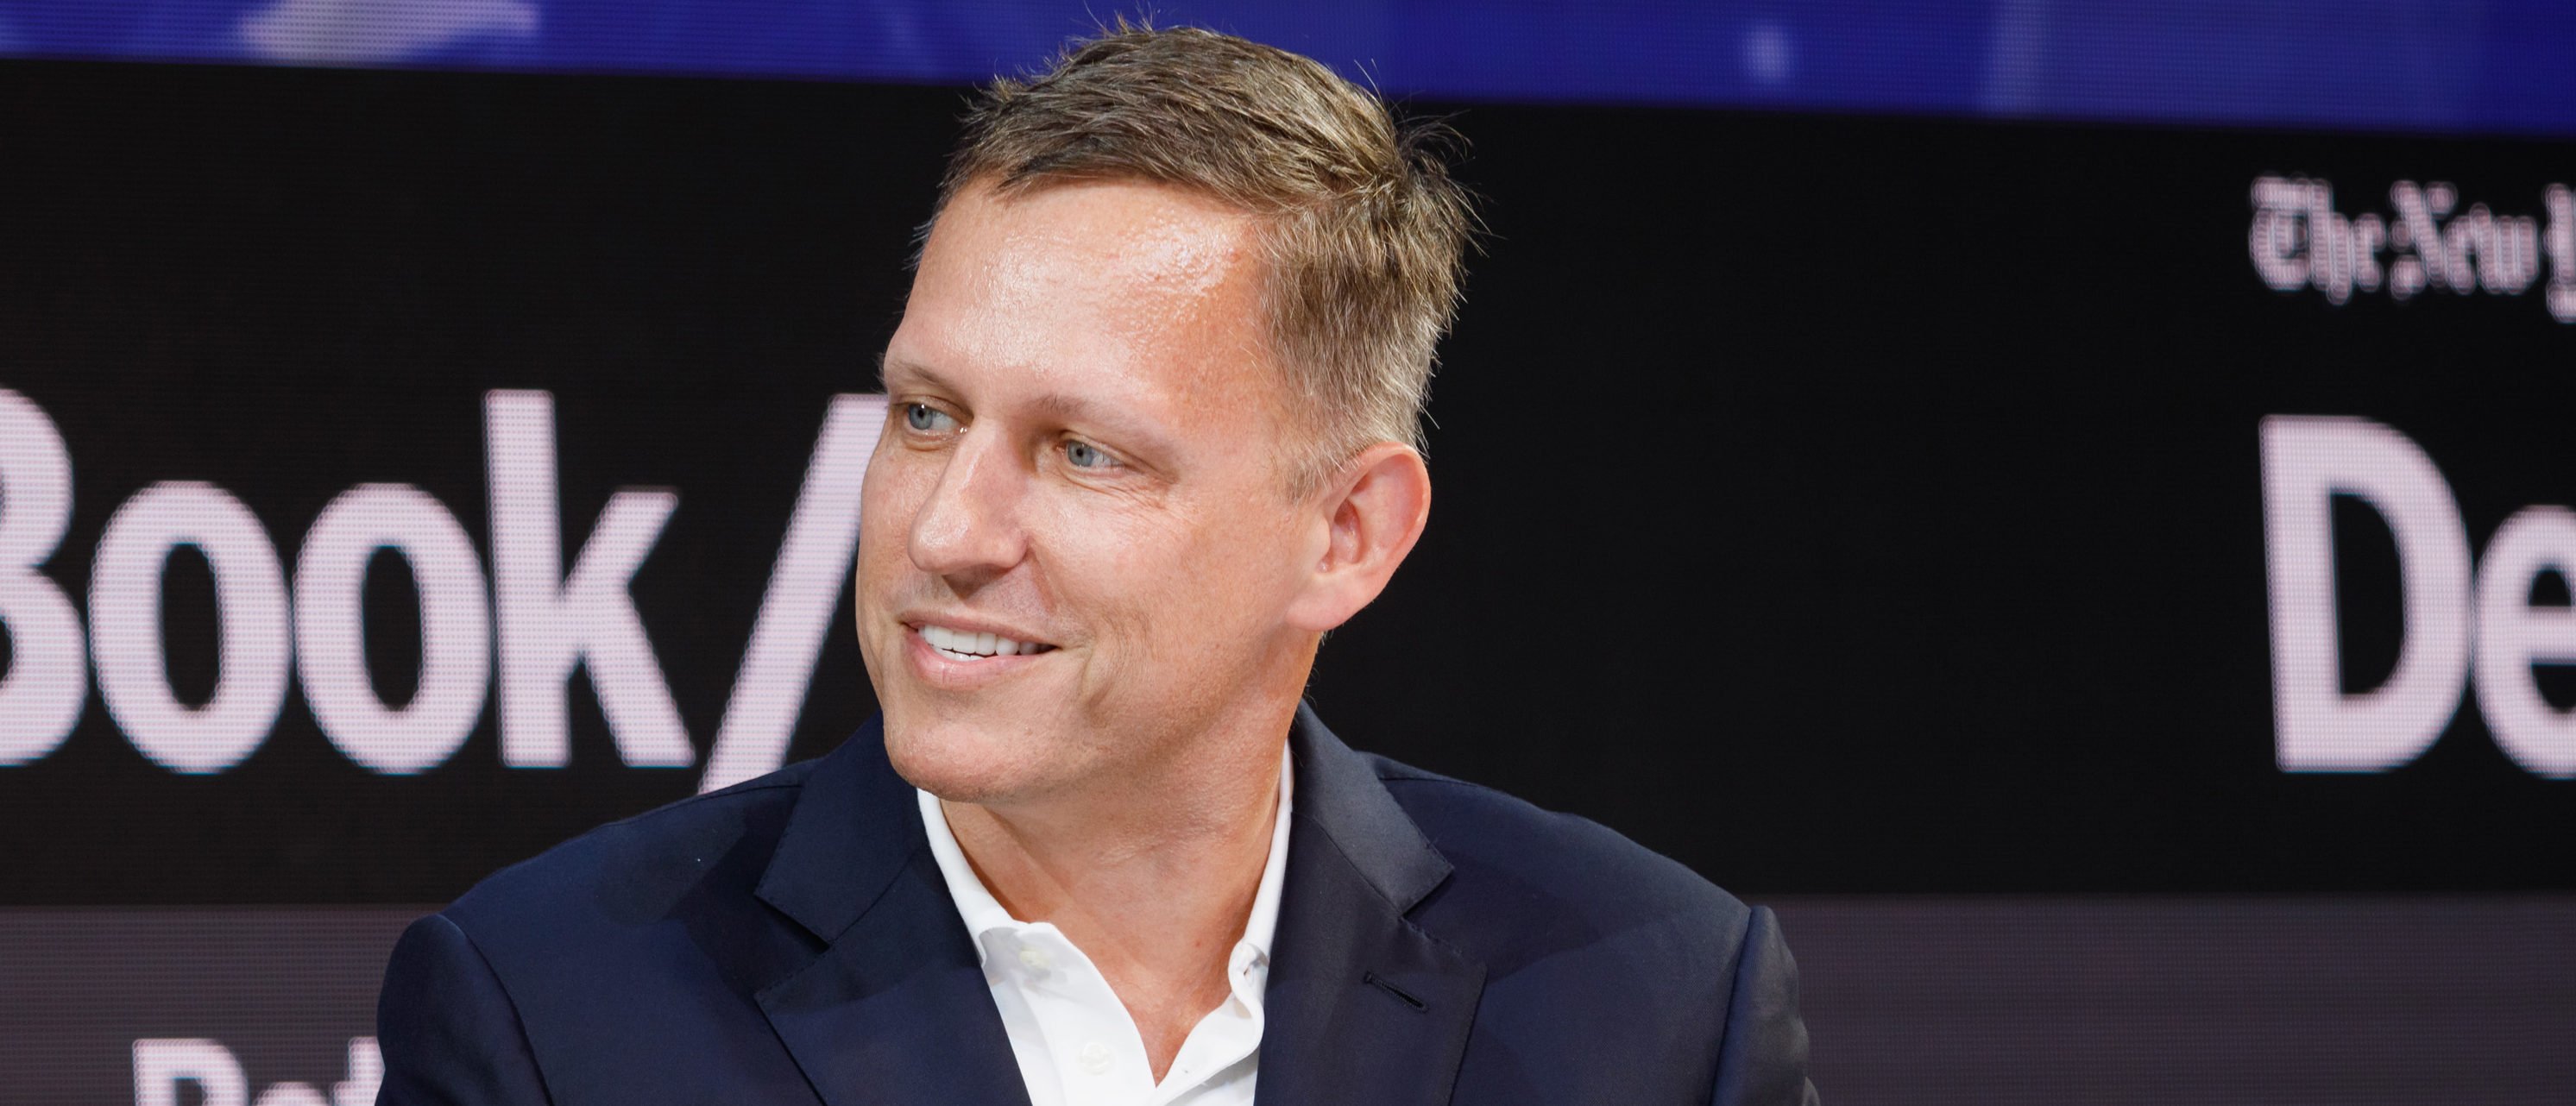 NEW YORK, NY - NOVEMBER 01: Peter Thiel, Partner, Founders Fund speaks onstage during the 2018 New York Times Dealbook on November 1, 2018 in New York City. (Photo by Michael Cohen/Getty Images for The New York Times)